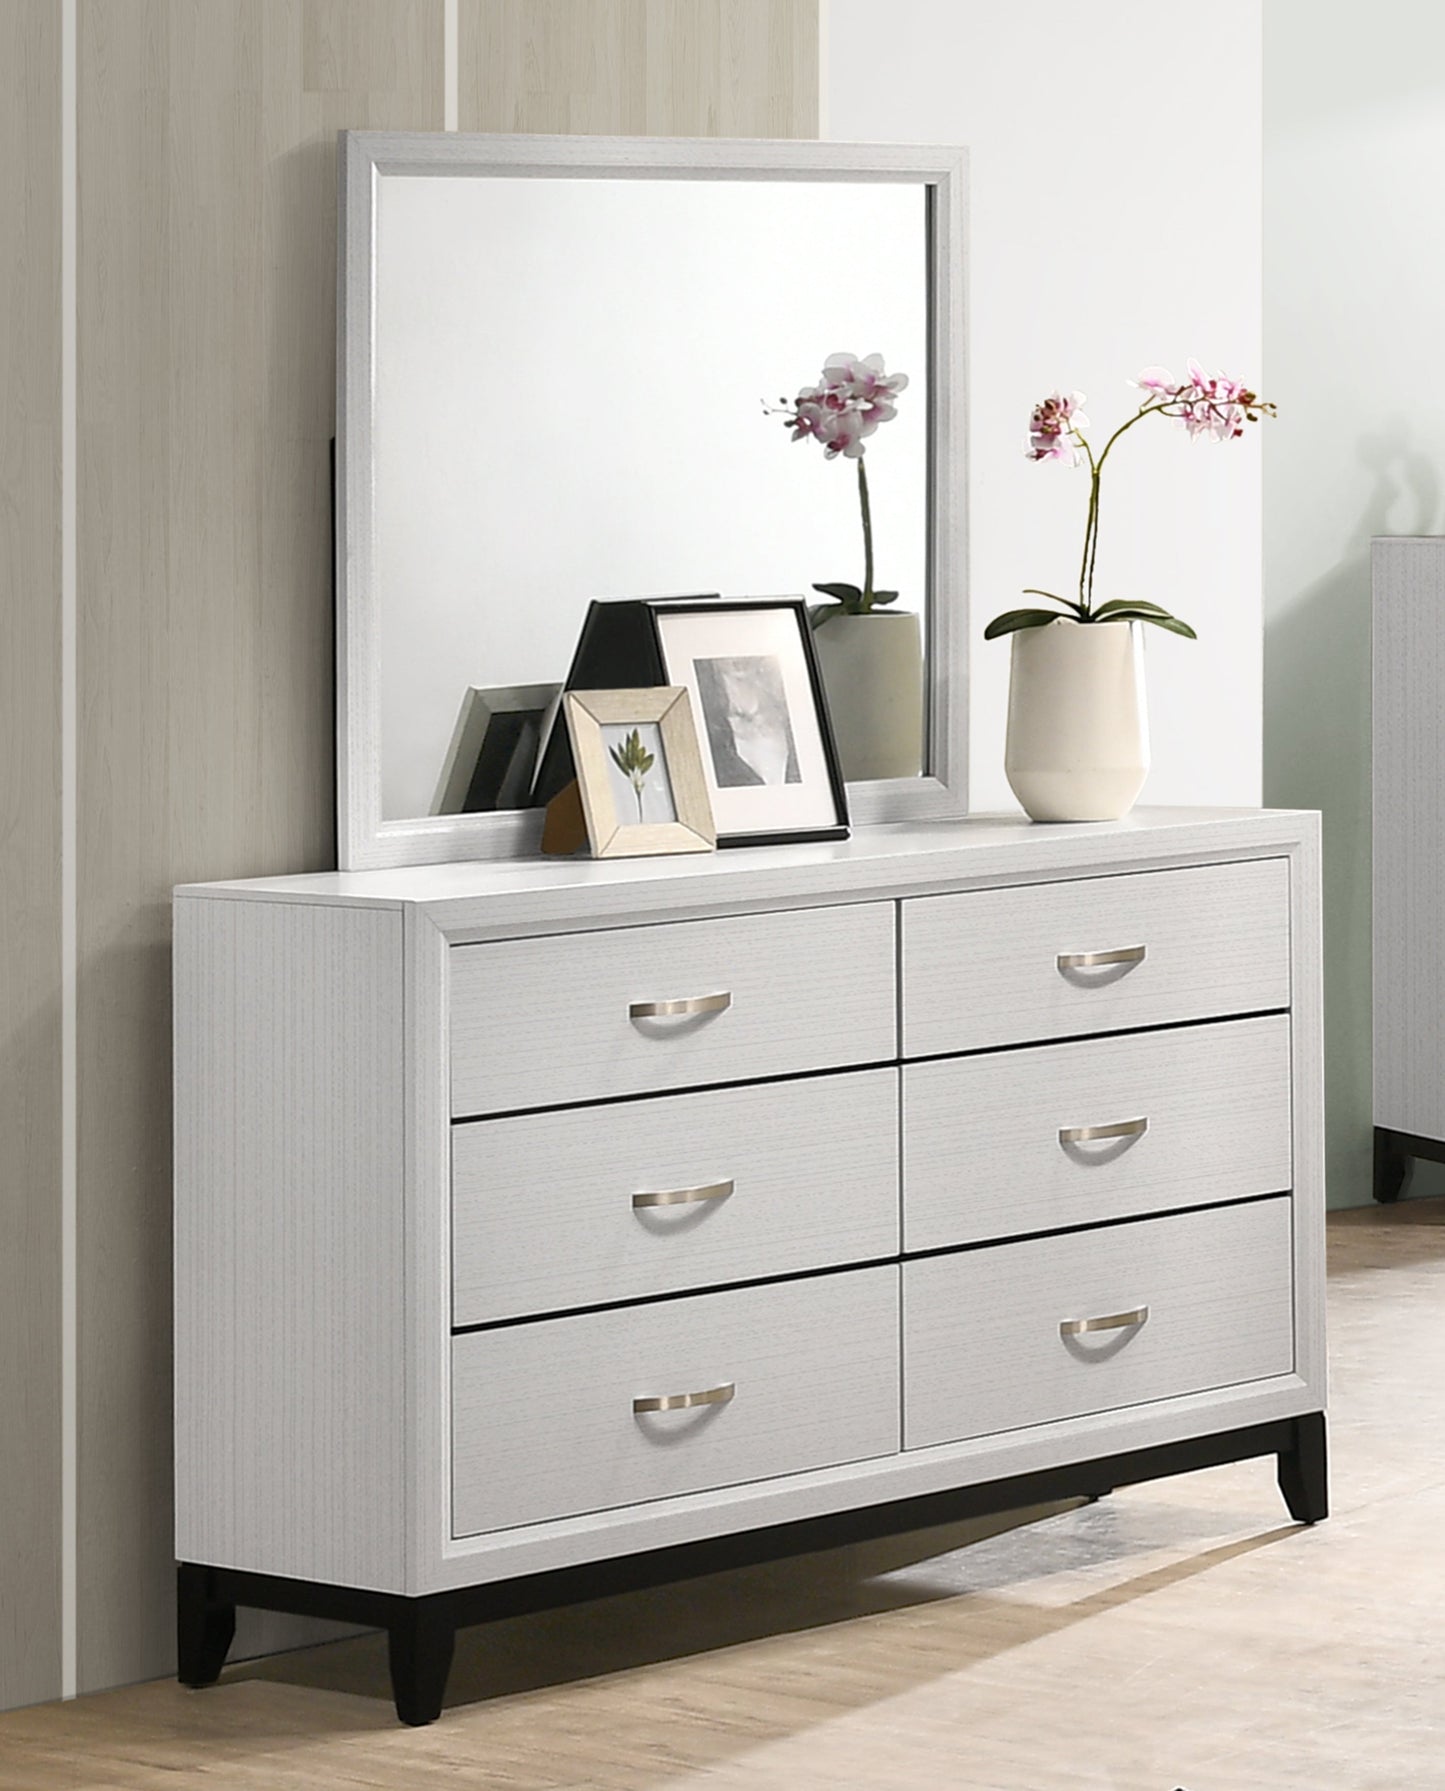 Stout Contemporary 6-Drawer Metal Bar Pulls Wood Dresser with Mirror, White